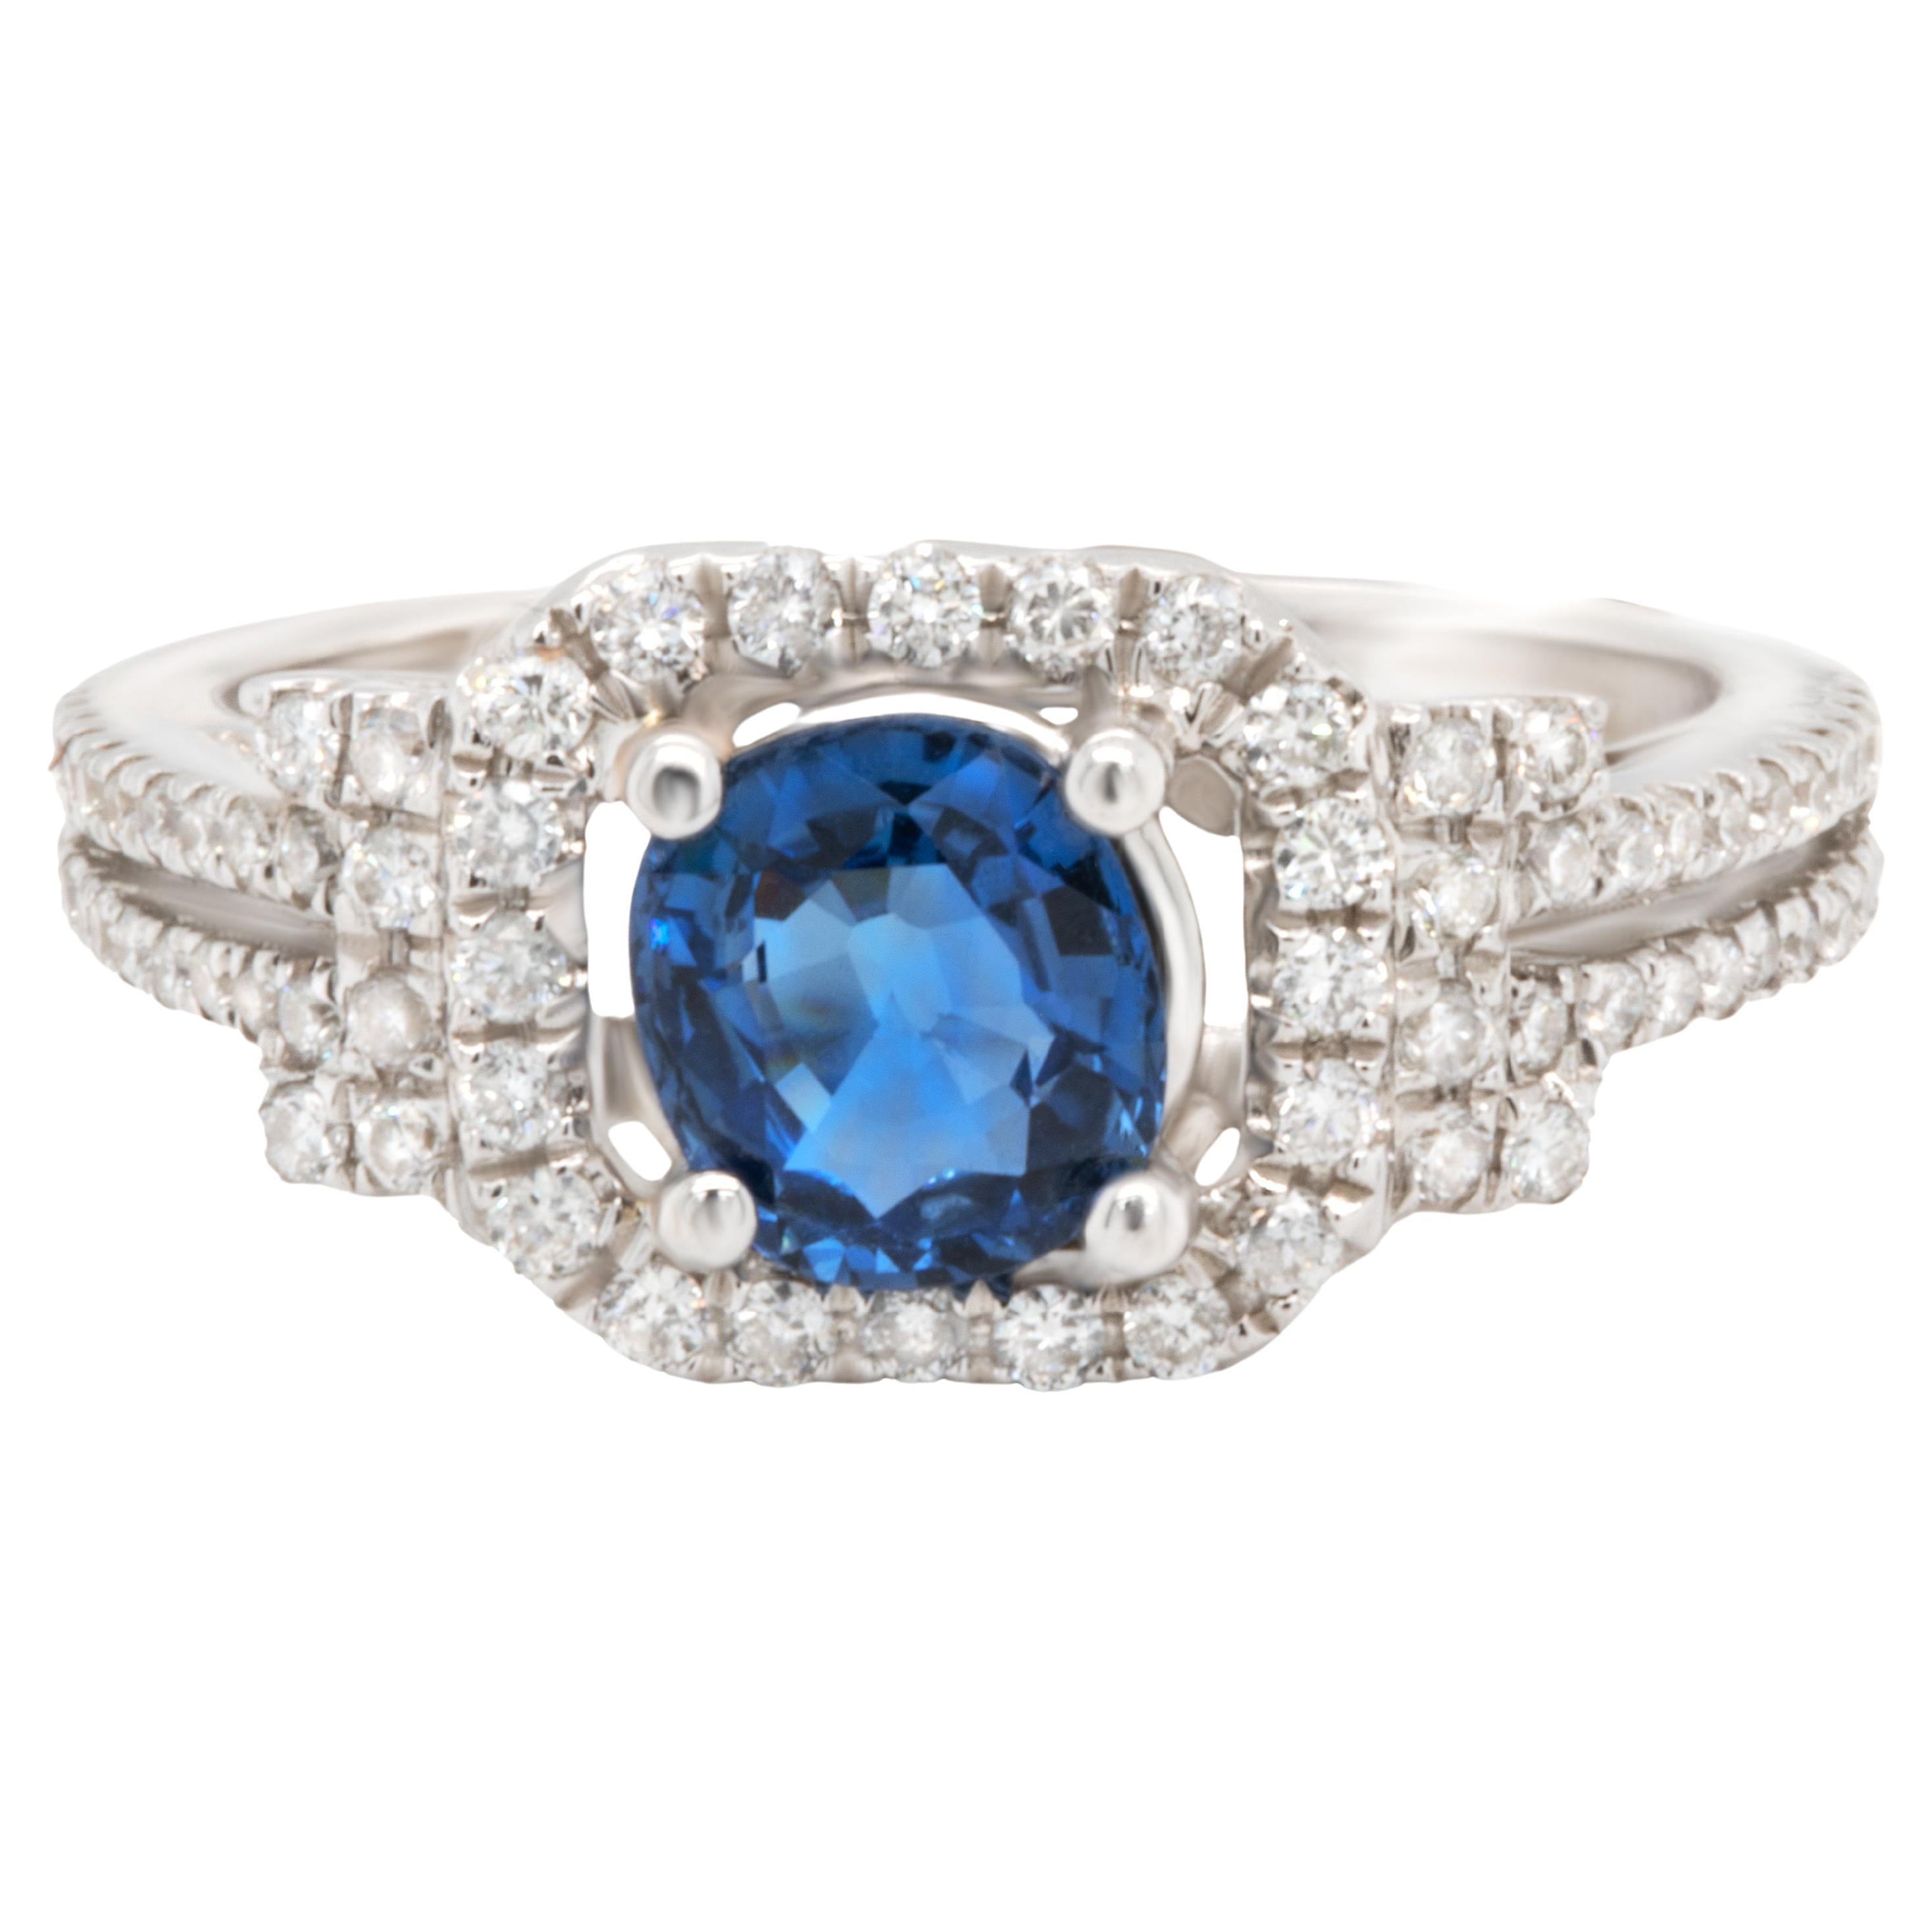 Sapphire Ring With Diamonds 1.56 Carats 18K White Gold